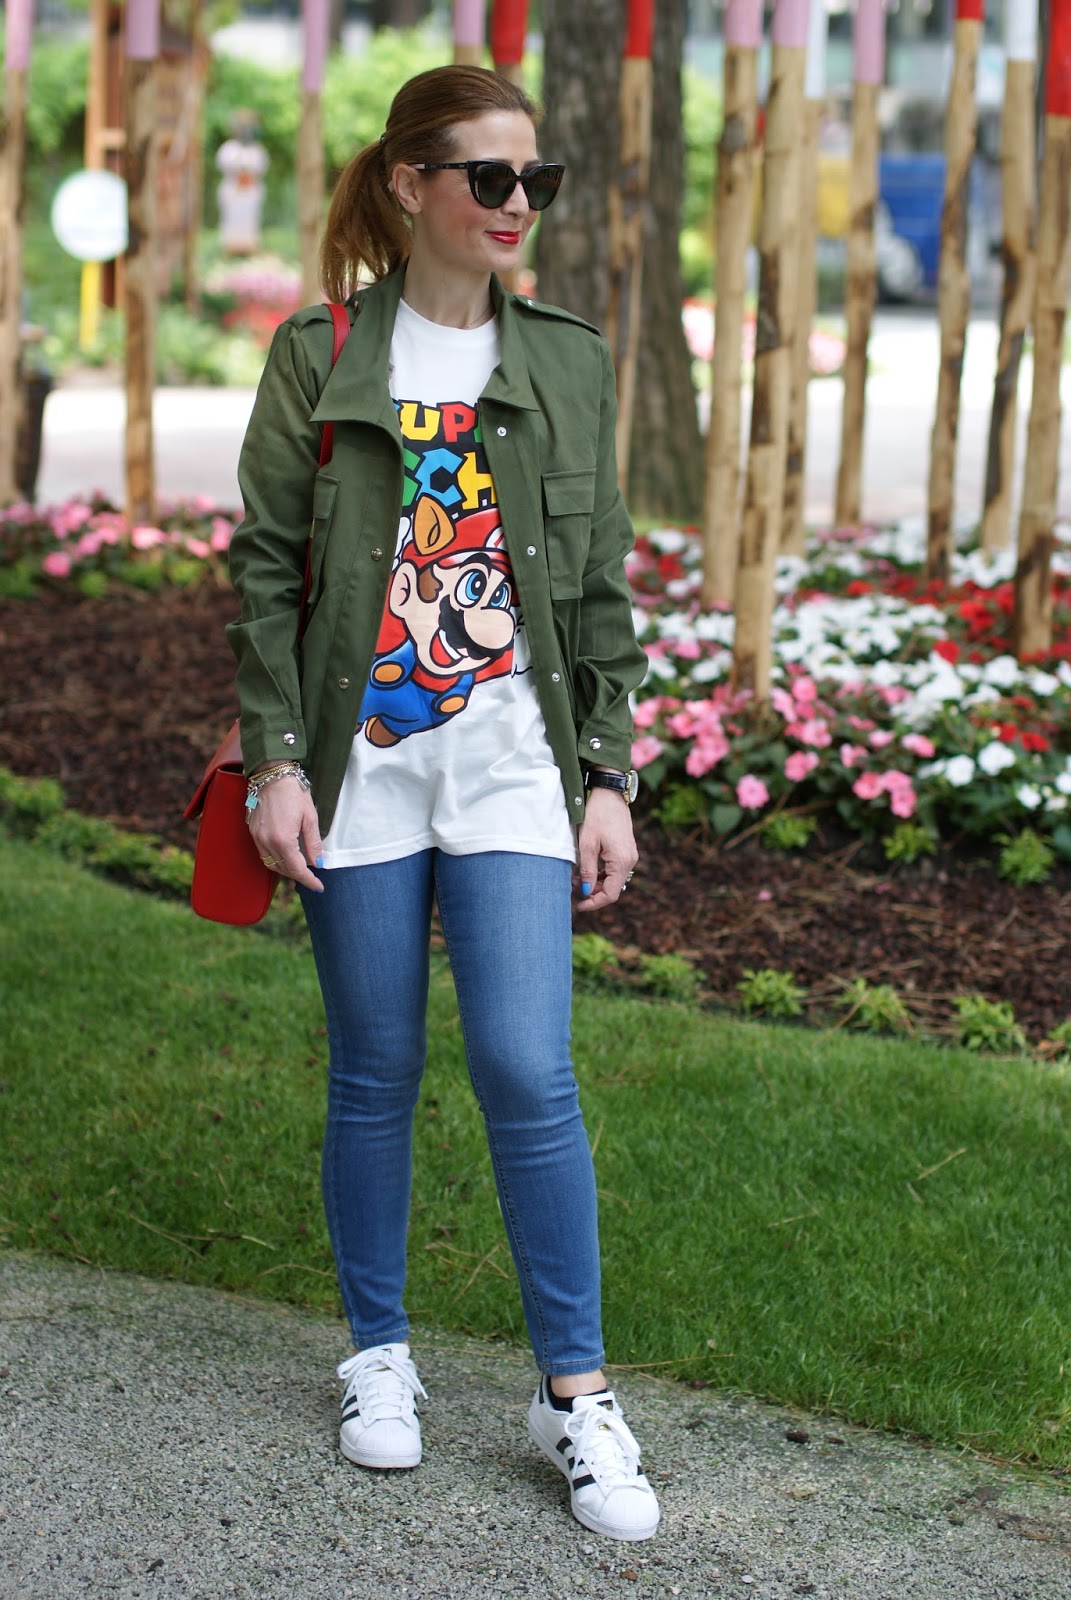 Moschino Super Moschino t-shirt with Super Mario bros, Lookbook Store army green jacket on Fashion and Cookies fashion blog, fashion blogger style